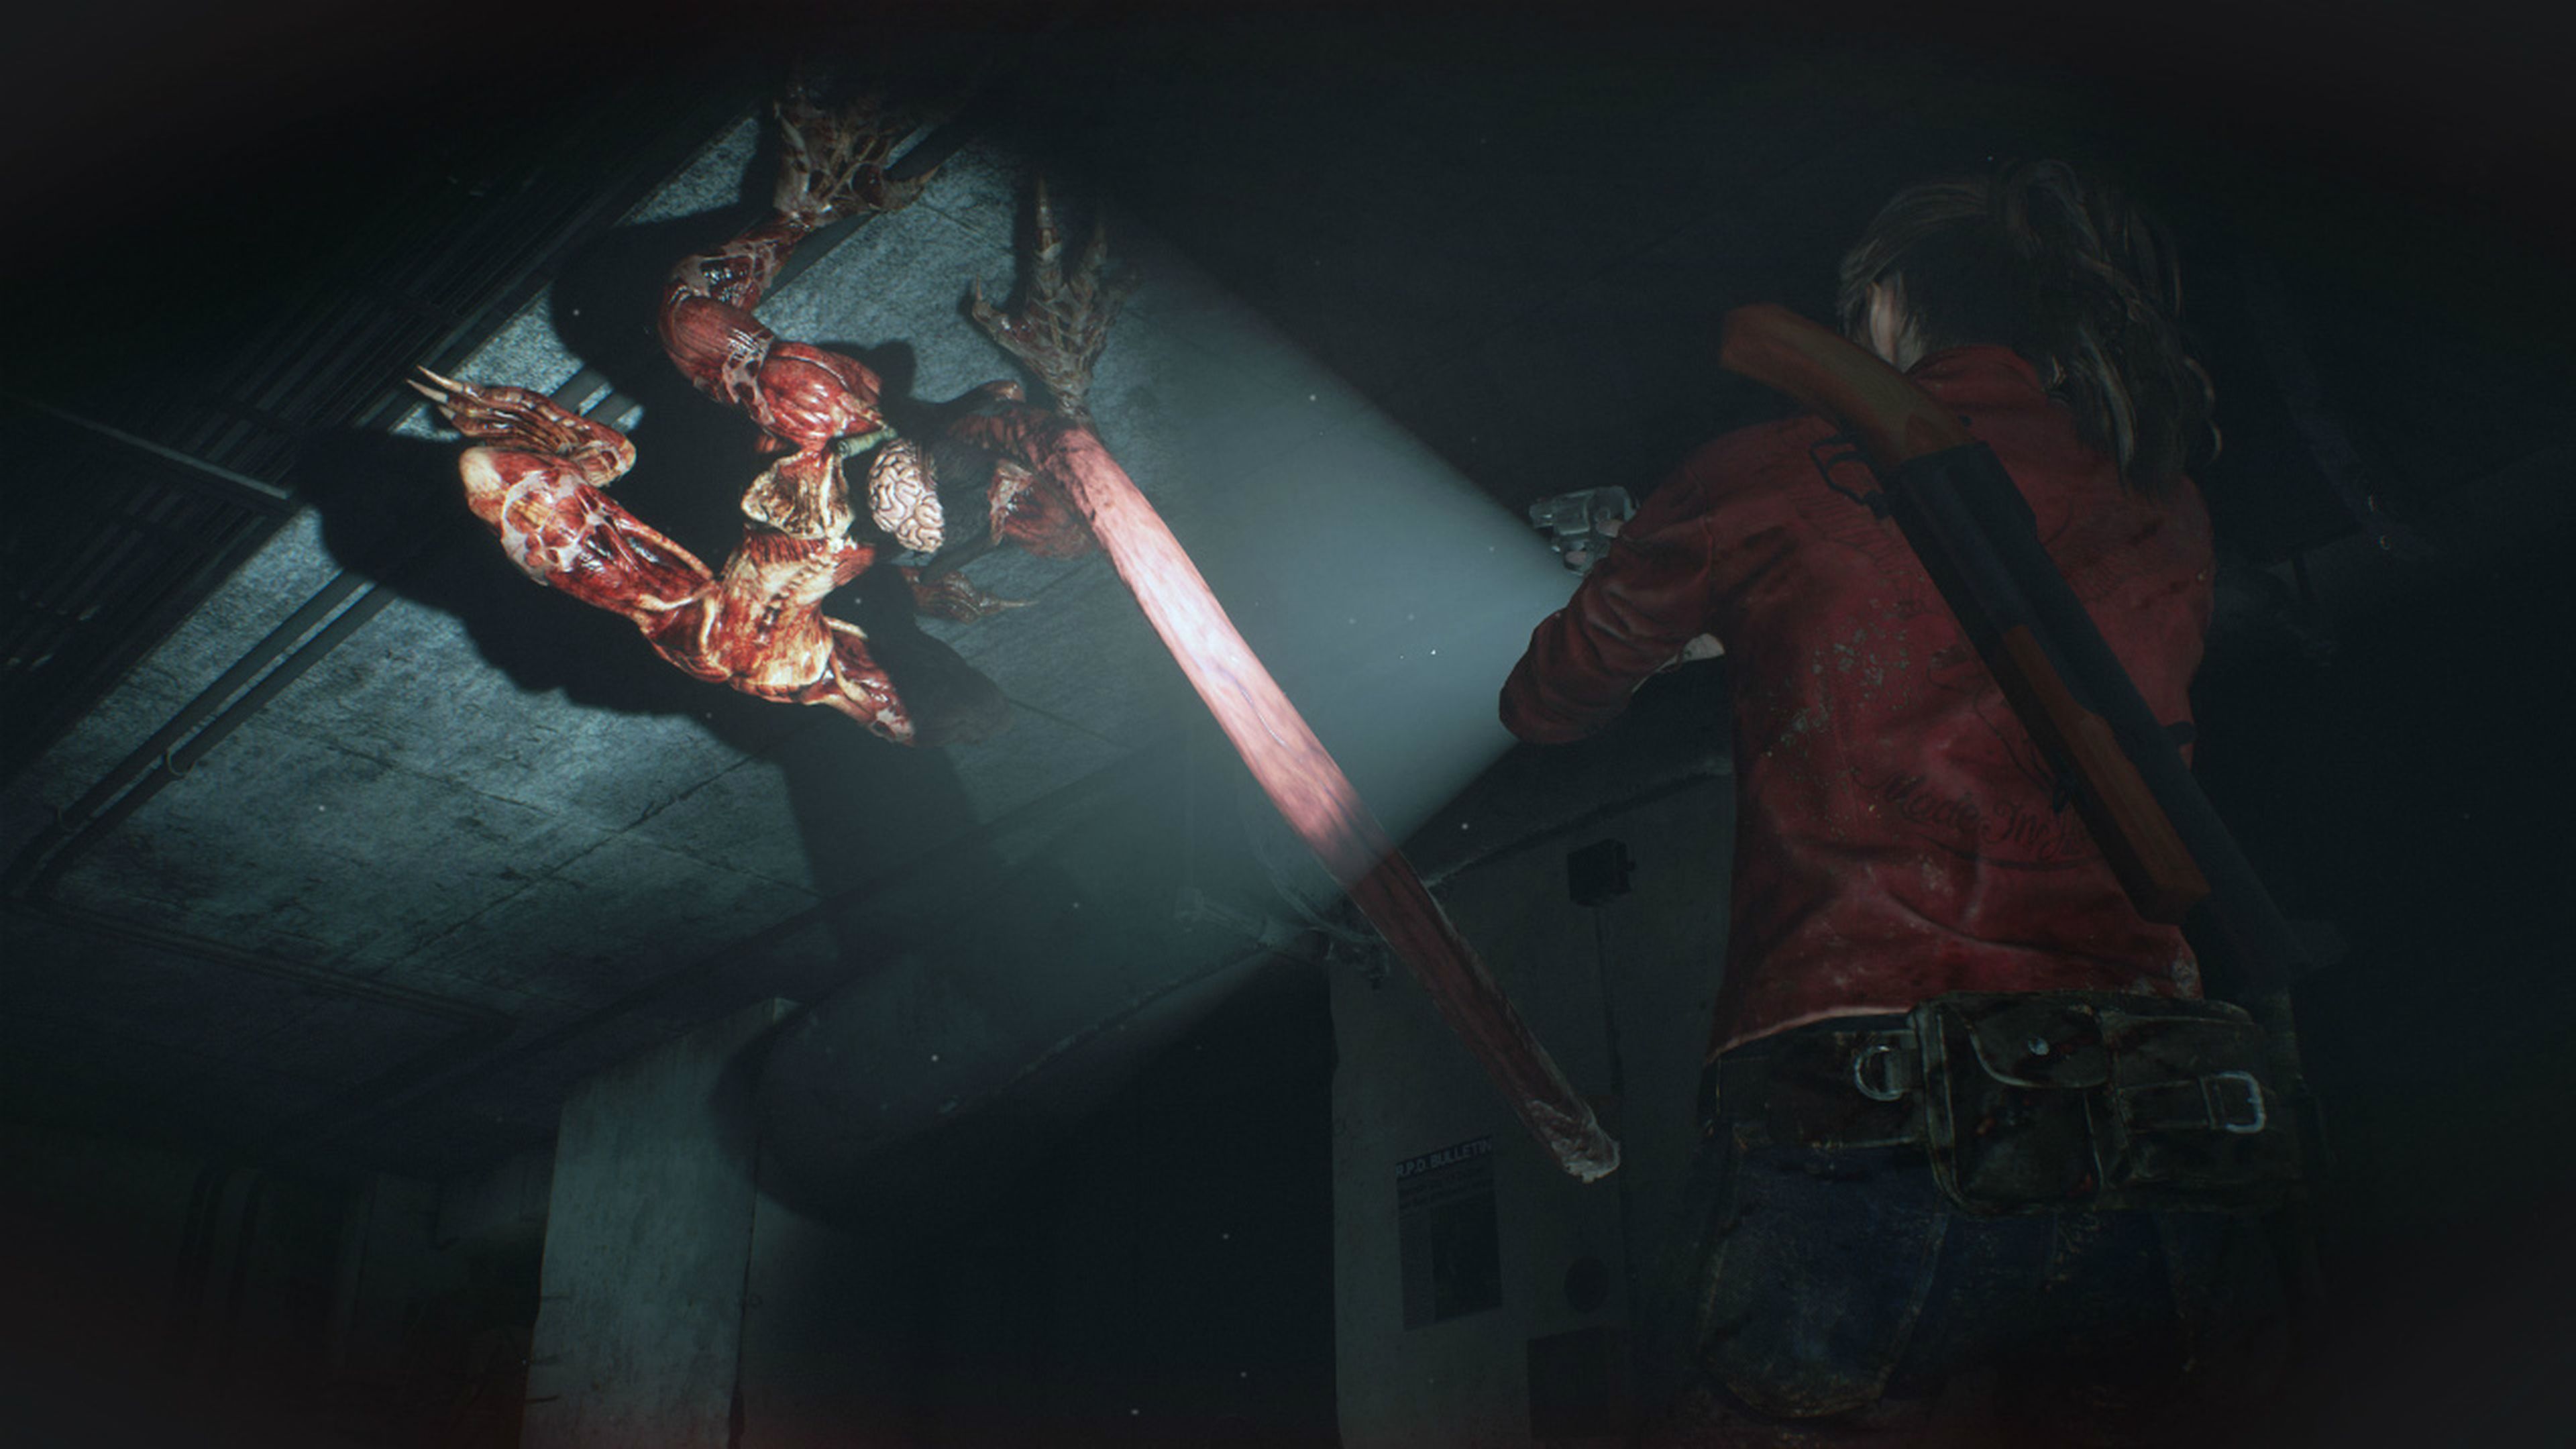 Resident Evil 2 Remake para PS4, Xbox One y PC